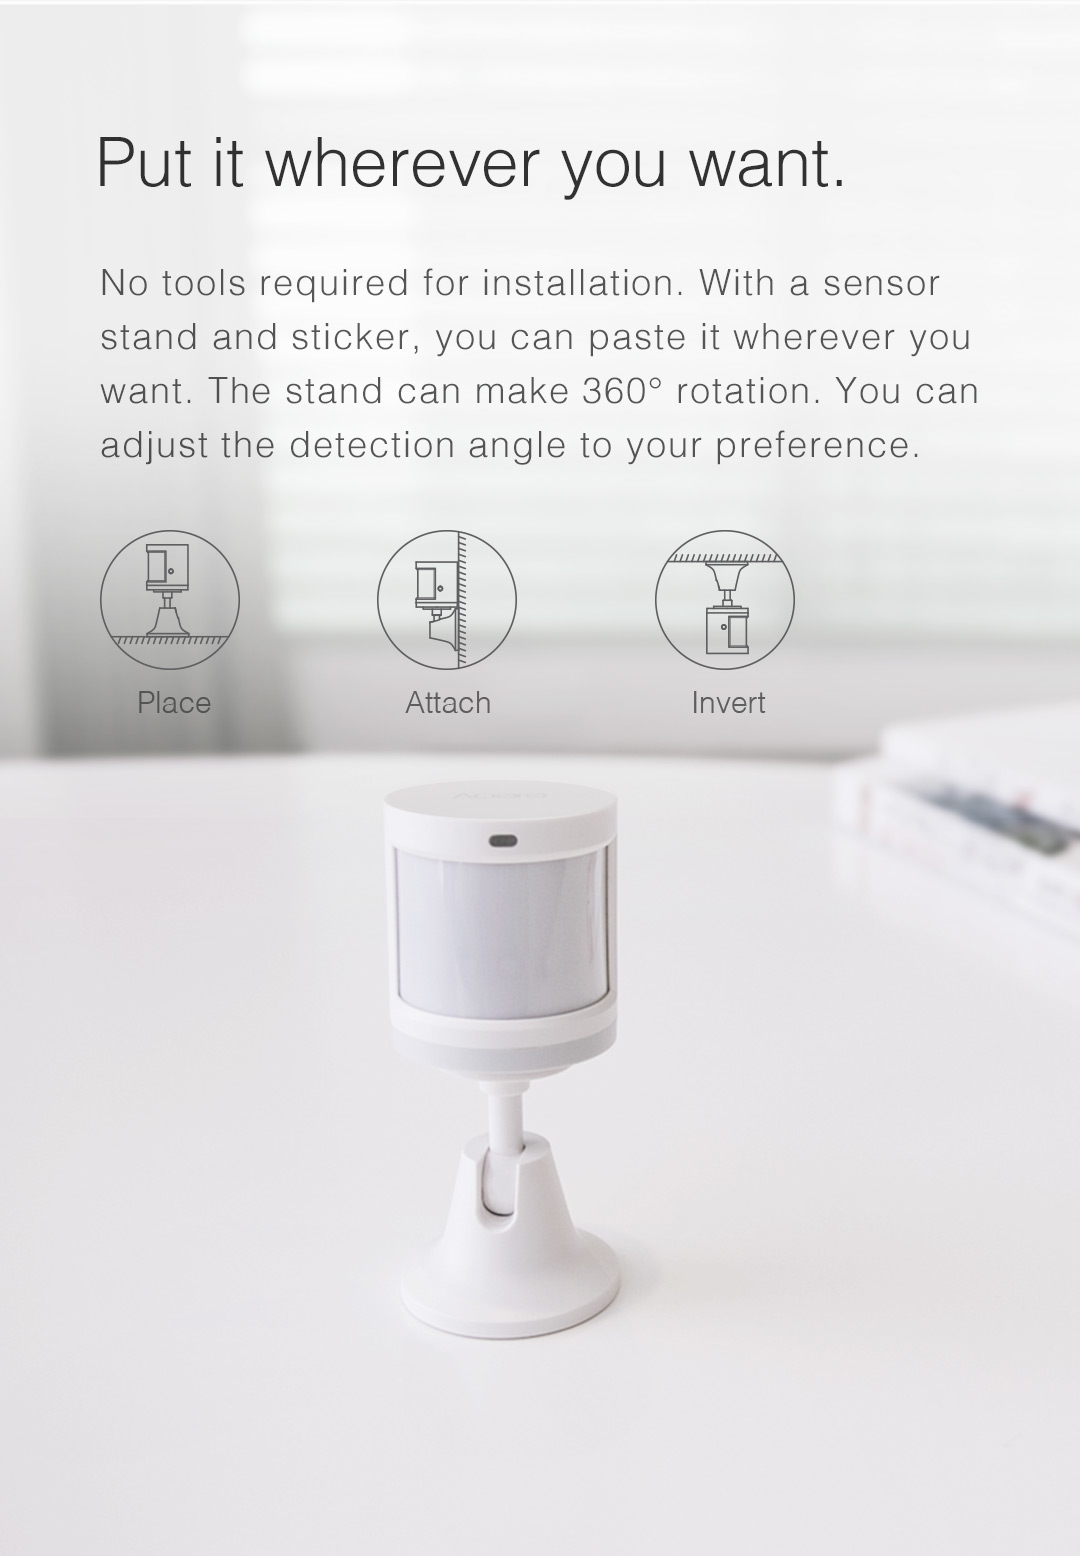 wireless motion sensor for home security system or alarm